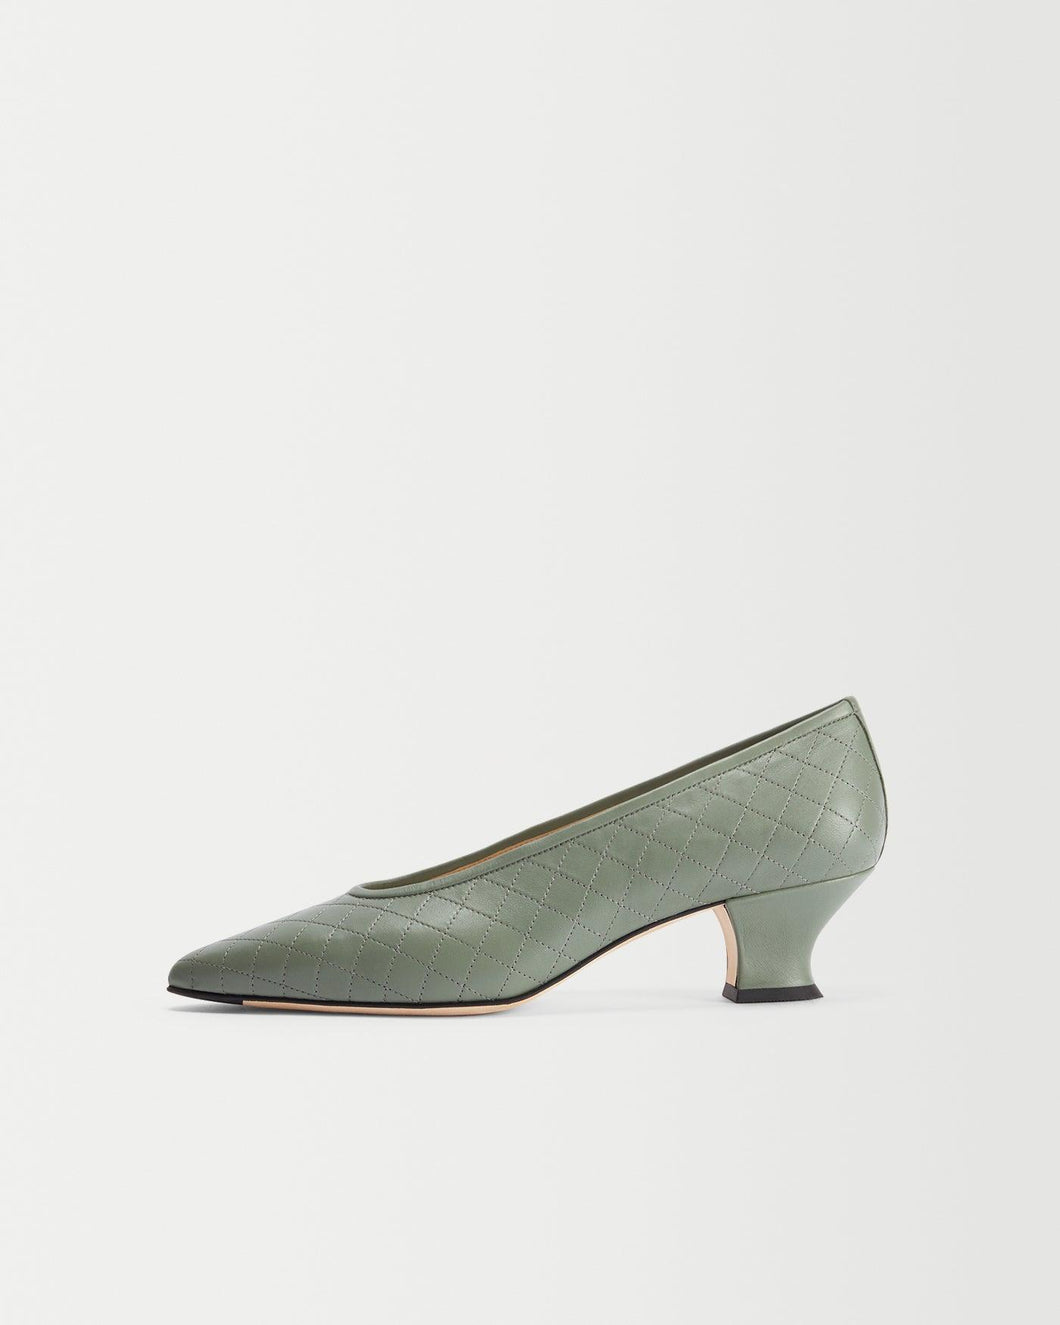 Side view of Yuni Buffa Roma Pump shoe in Sage Green. Handcrafted comfortable designer high-heels made  in Italy with Italian Lamb Nappa leather